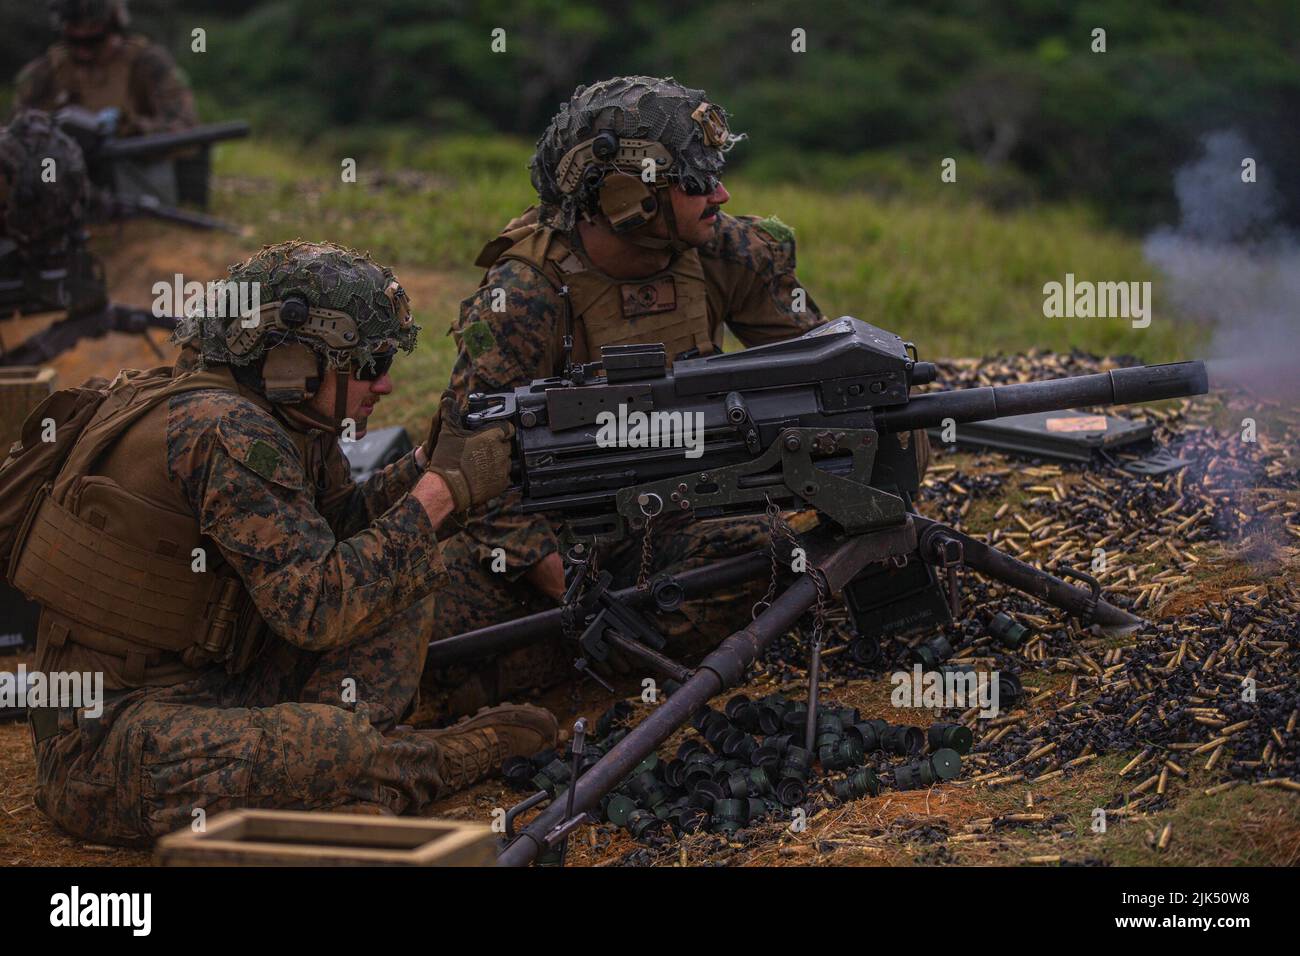 U.S. Marine Corps Lance Cpl. Charles Joch (left) and Lance Cpl. Maxwell Cole (right), both machine gunners with 3d Battalion, 2d Marines, fire an MK19 grenade launcher during a Tactical Small Unit Leader Course on Camp Schwab, Okinawa, Japan, July 28, 2022. This training improved the Marines’ proficiency at the tactical level and developed small-unit leadership. 3/2 is forward deployed in the Indo-Pacific under 4th Marines, 3d Marine Division as part of the Unit Deployment Program. Joch is a native of Centreville, Virginia and Cole is a native of Hartsville, South Carolina. (U.S. Marine Corps Stock Photo